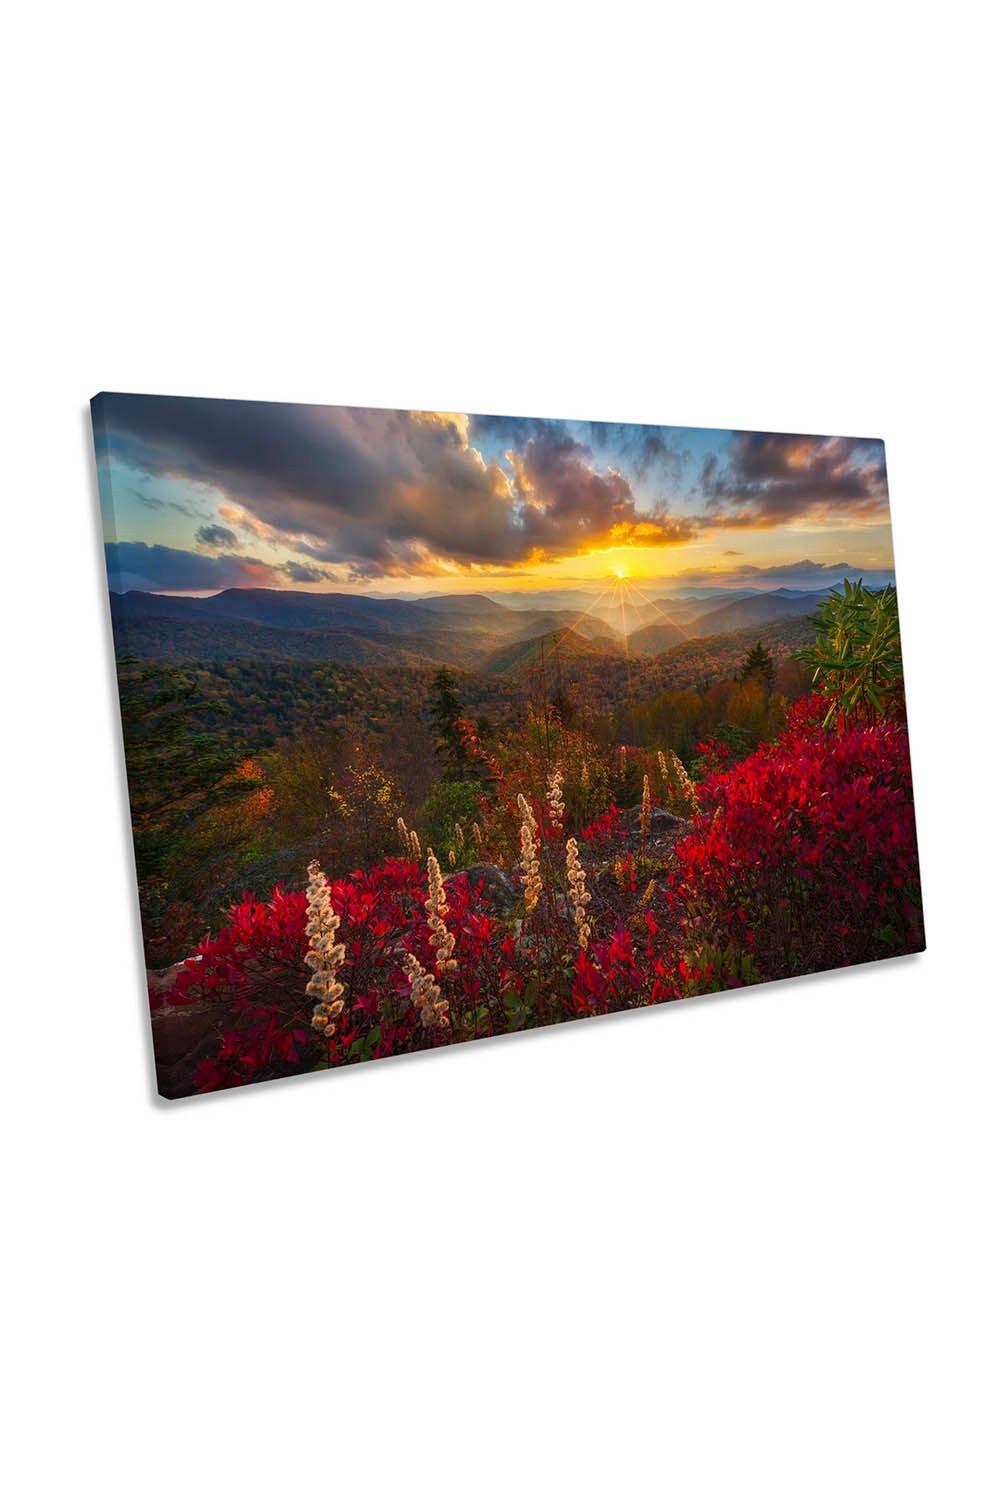 Red Flowers Sunset Mountains Landscape Canvas Wall Art Picture Print